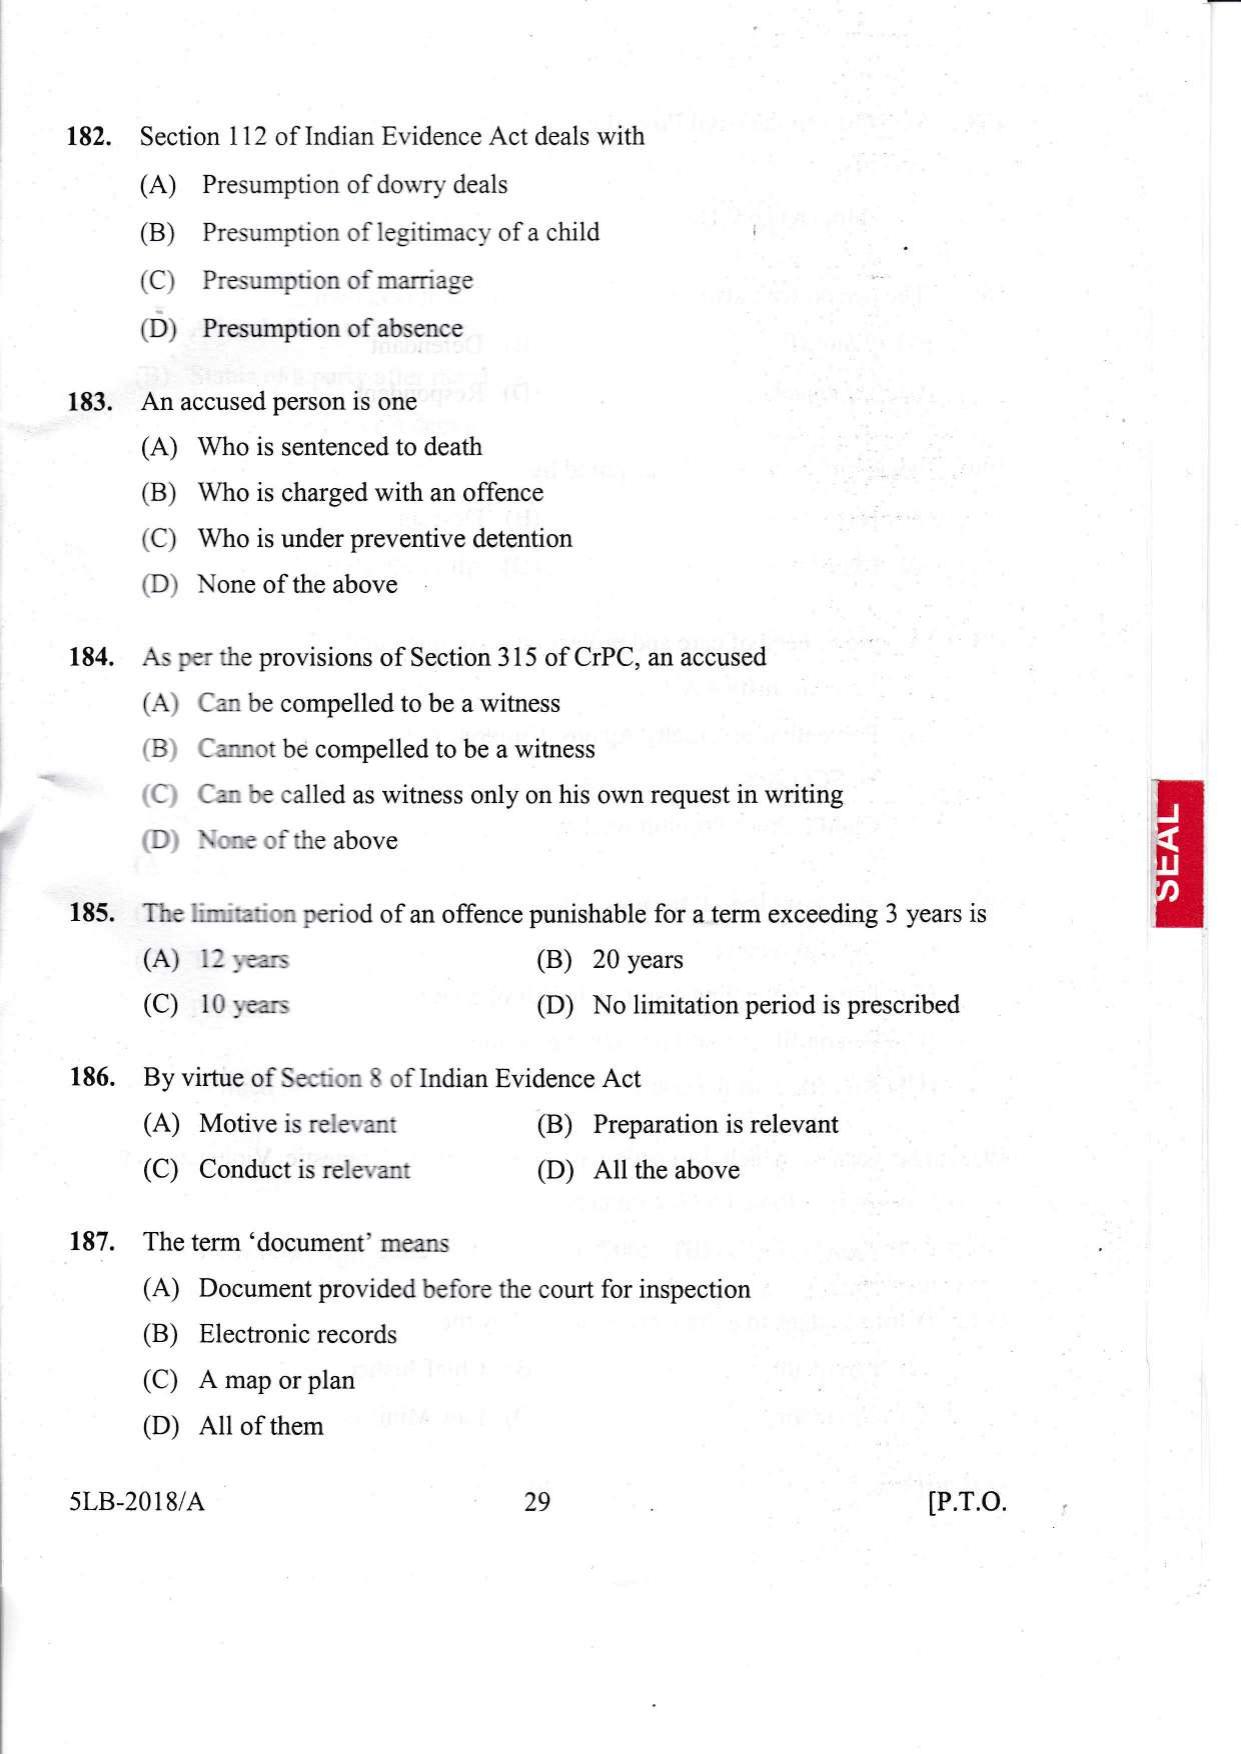 KLEE 5 Year LLB Exam 2018 Question Paper - Page 29